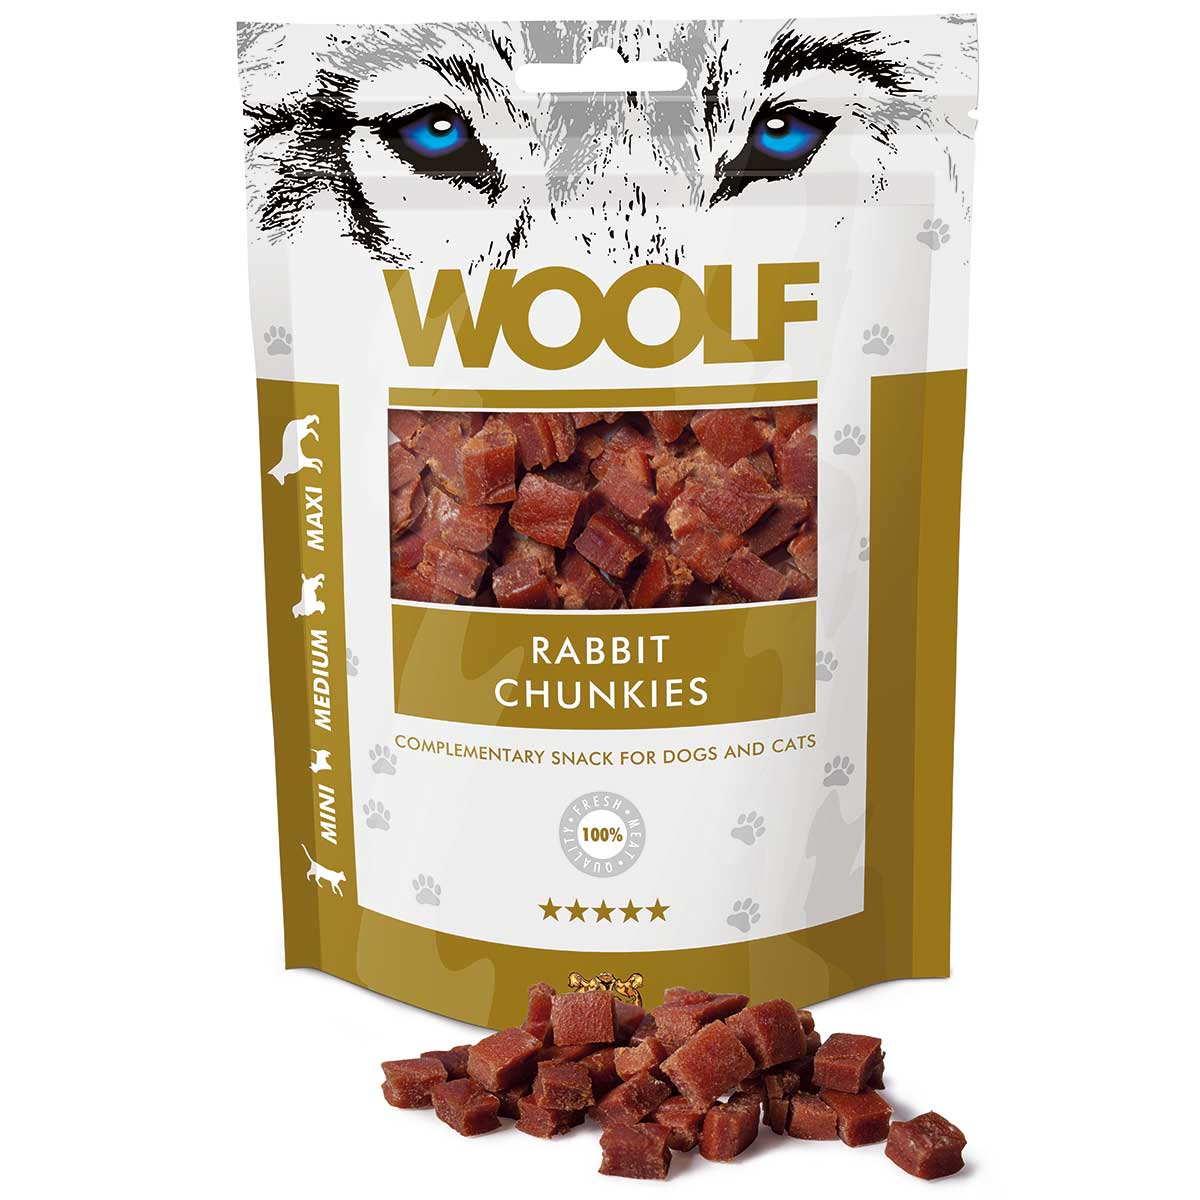 Woolf Chunkies, friandises pour chiens au lapin